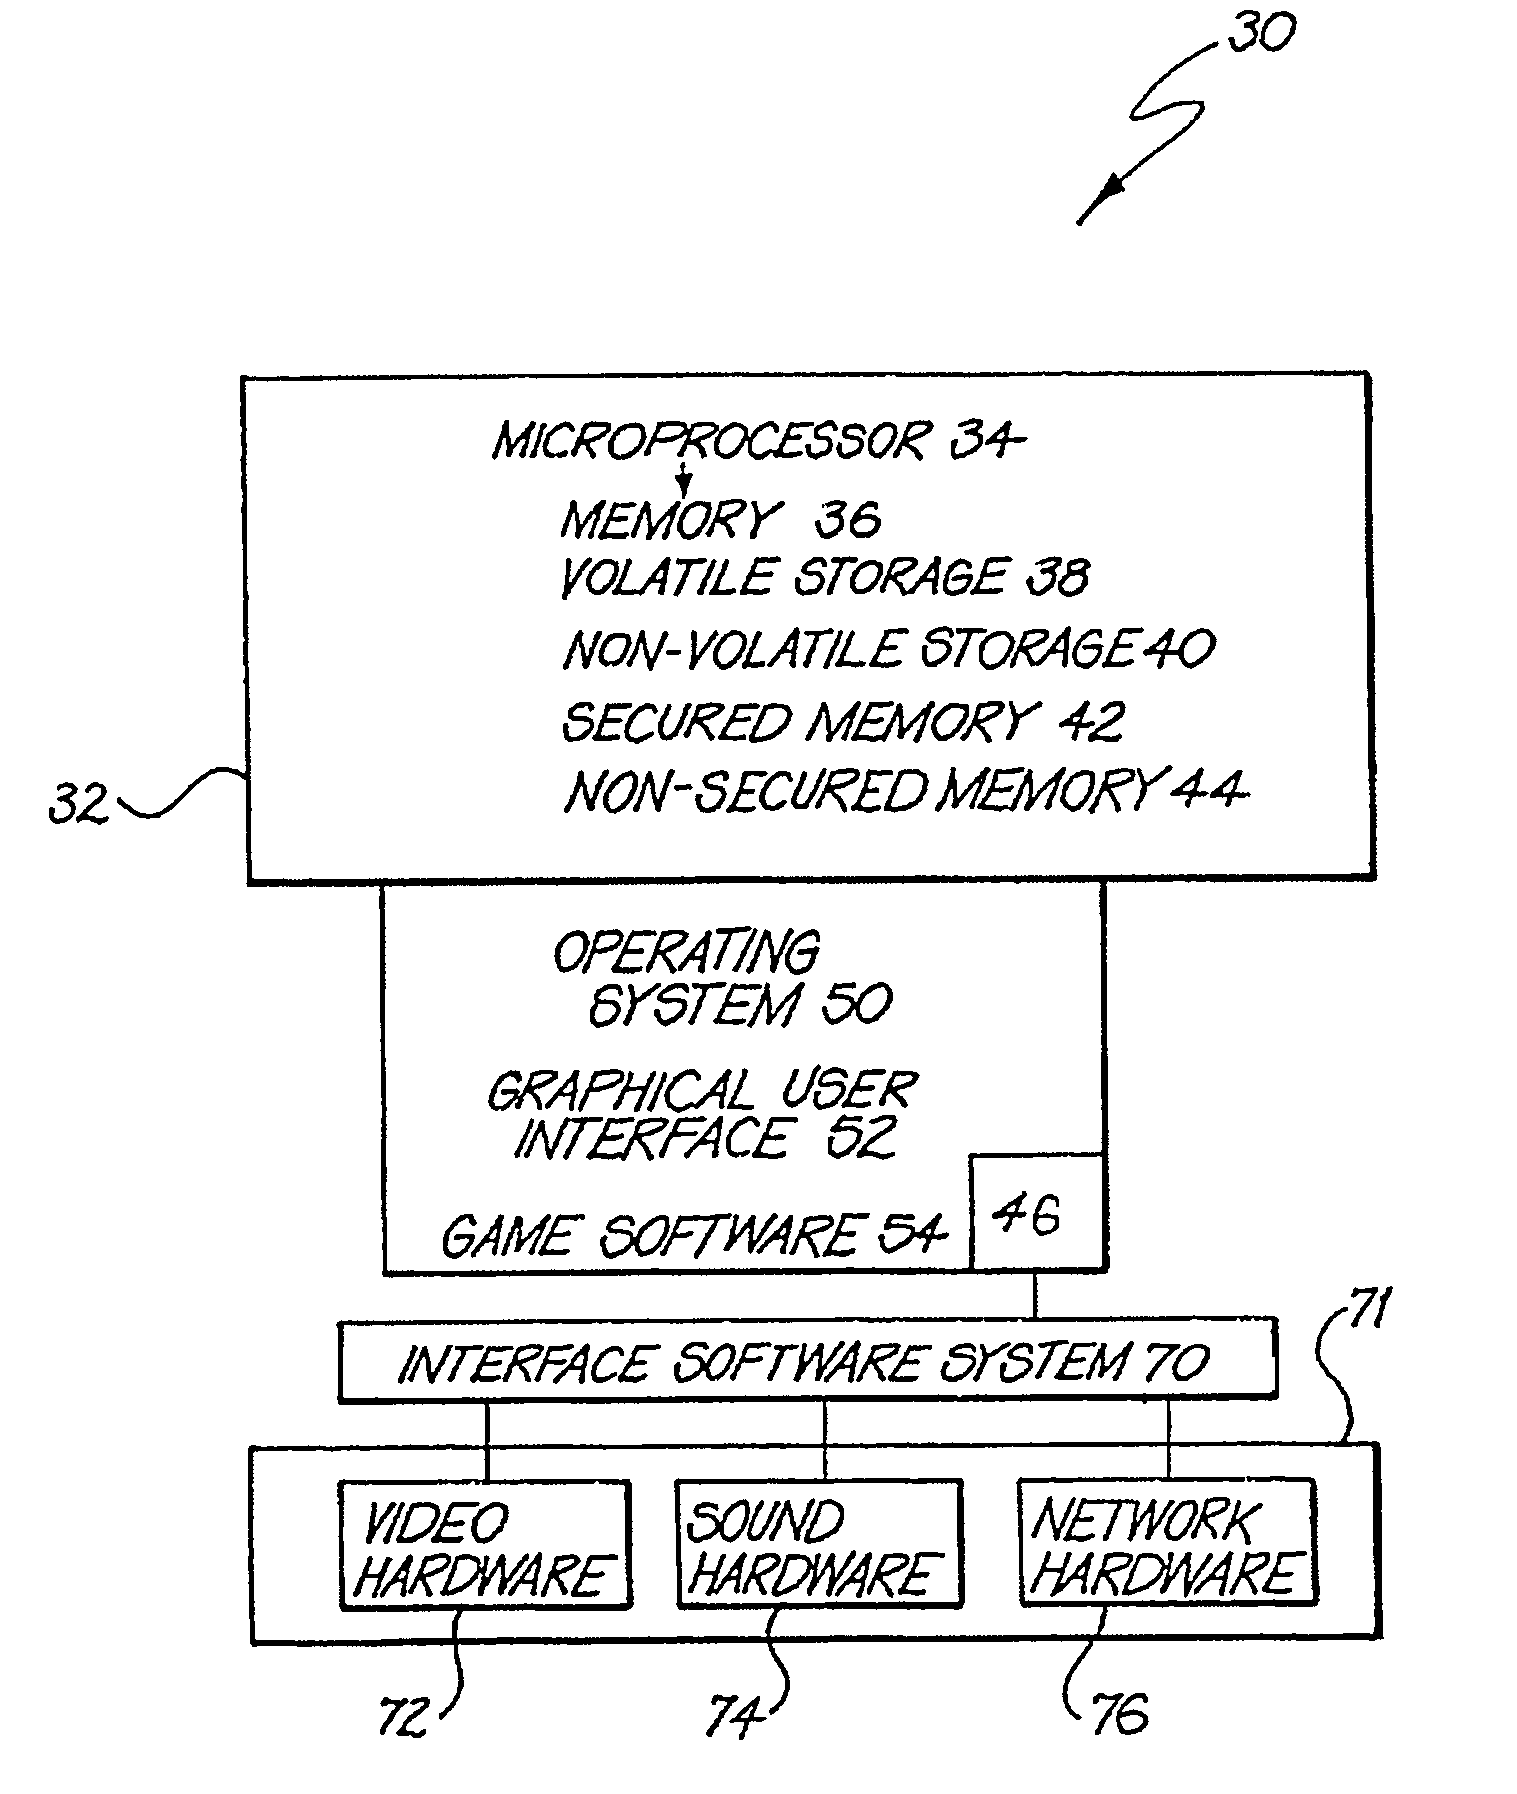 Input/Output Interface and device abstraction